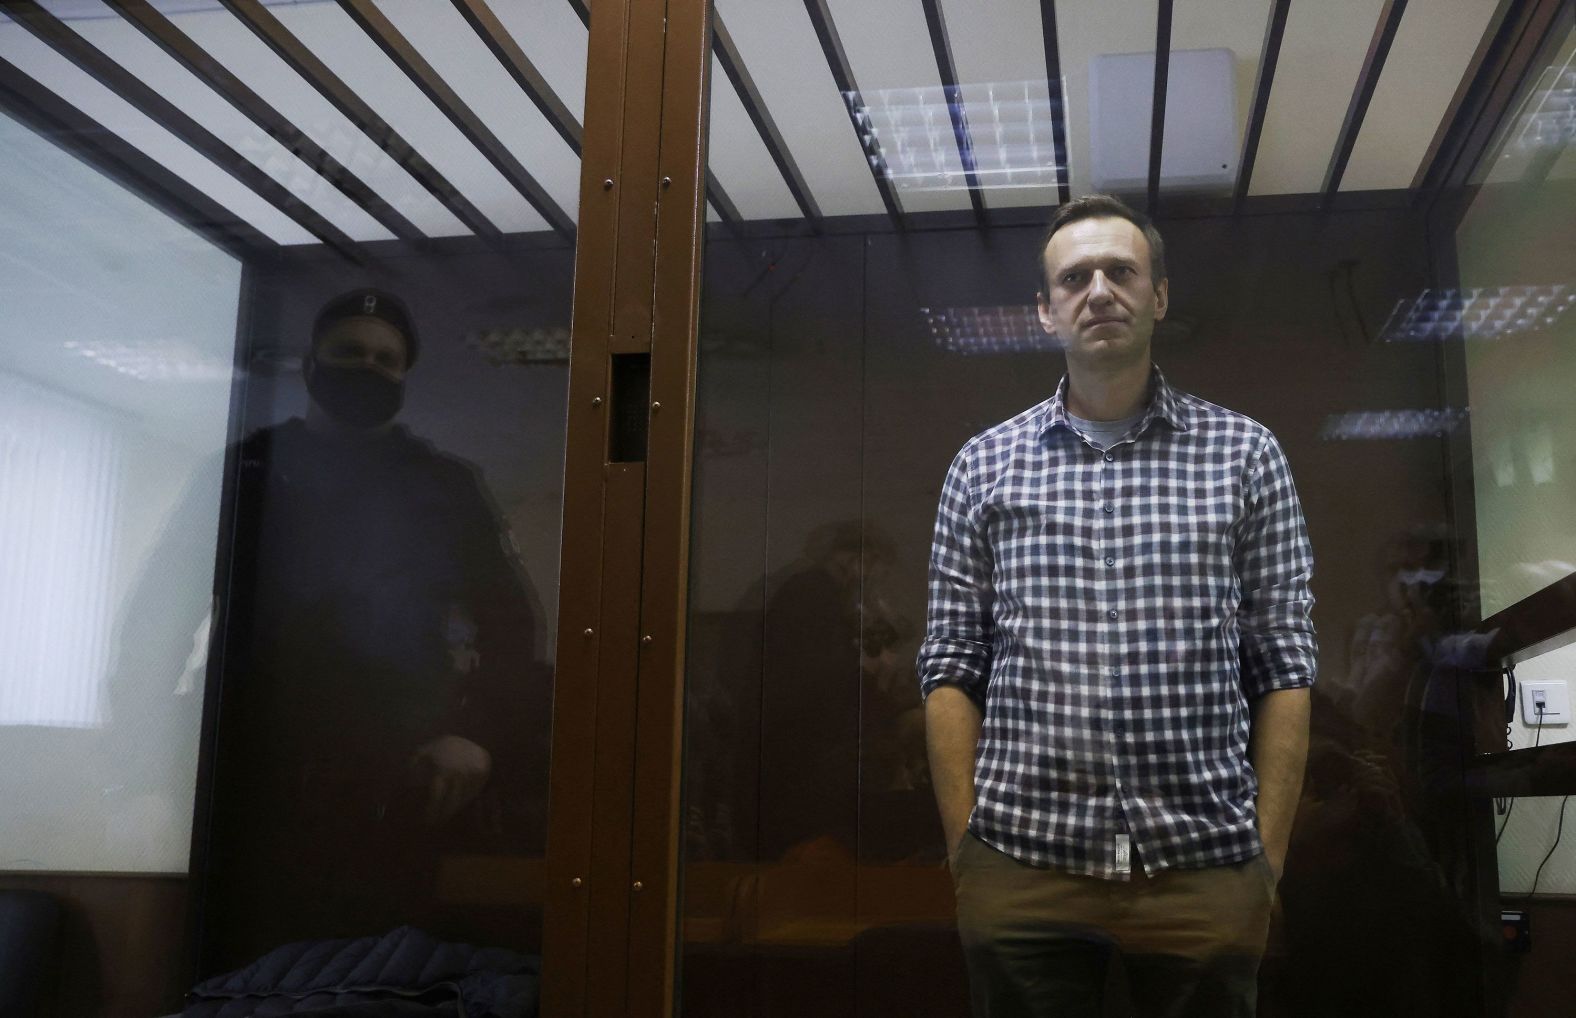 Jailed Russian opposition figure and outspoken Kremlin critic <a href="index.php?page=&url=https%3A%2F%2Fwww.cnn.com%2F2024%2F02%2F16%2Feurope%2Falexey-navalny-dead-russia-prison-intl%2Findex.html" target="_blank">Alexey Navalny</a>, who made global headlines when he was poisoned with a nerve agent in 2020, died February 16 at the age of 47, the Russian prison service said. Navalny "felt unwell after a walk" and "almost immediately" lost consciousness, the prison service said. It said it was investigating his "sudden death."